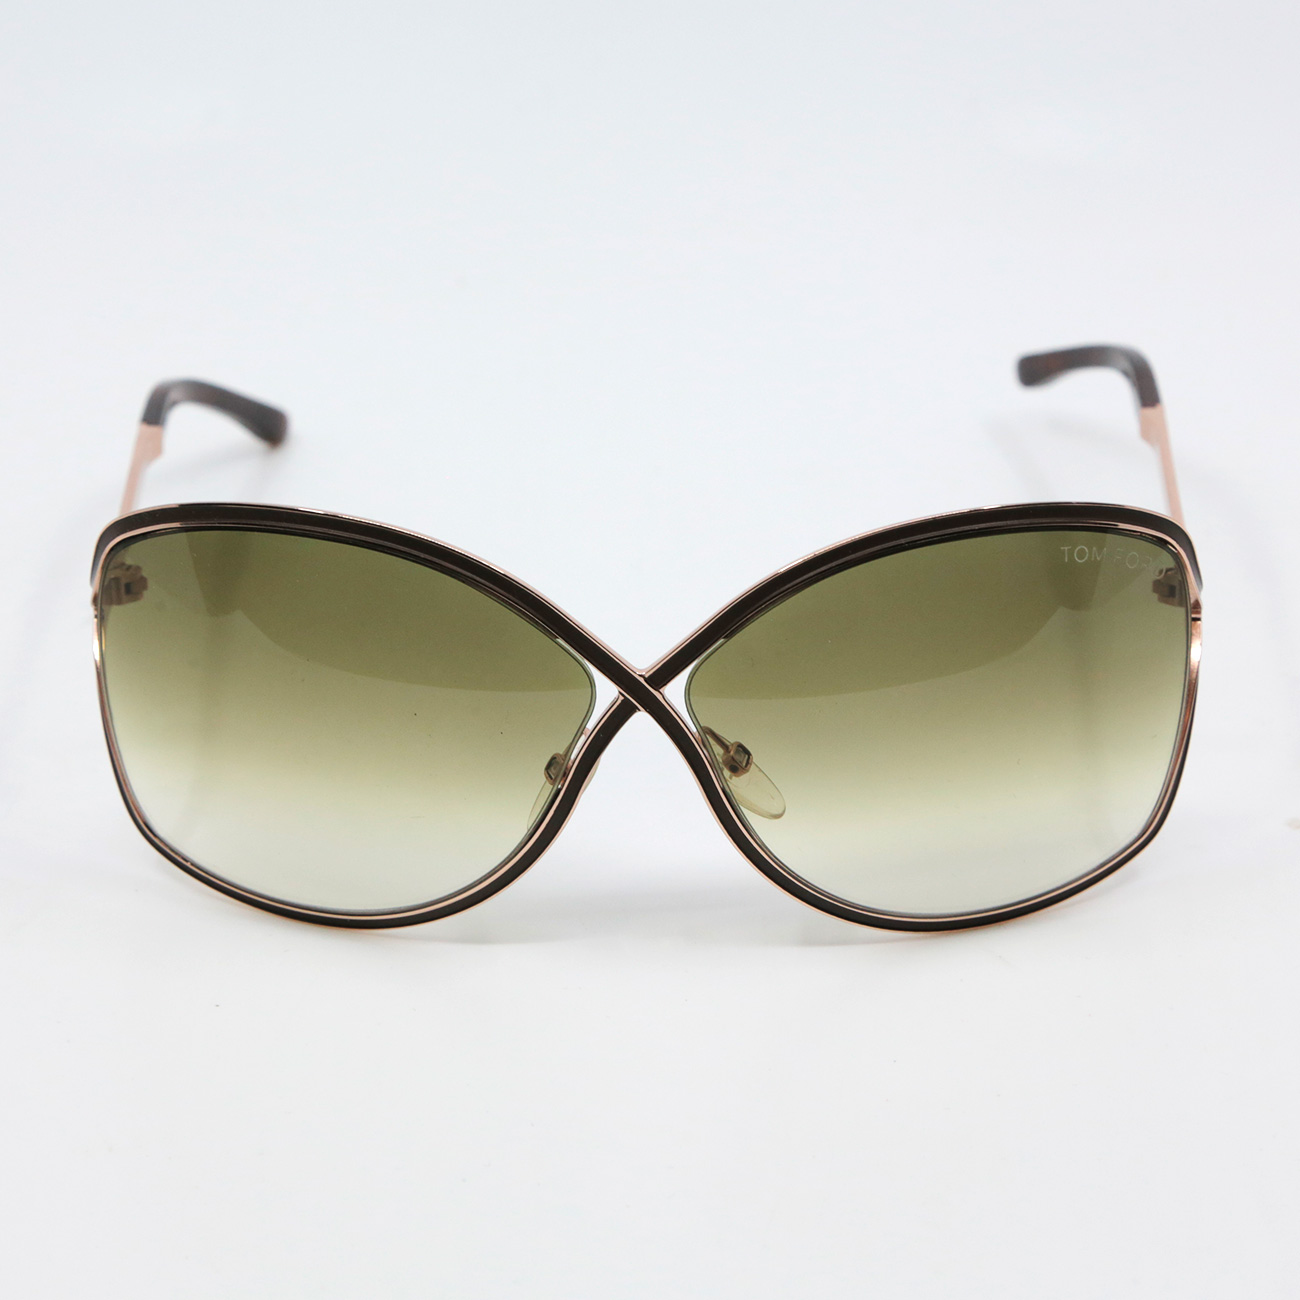 Lunettes Tom Ford